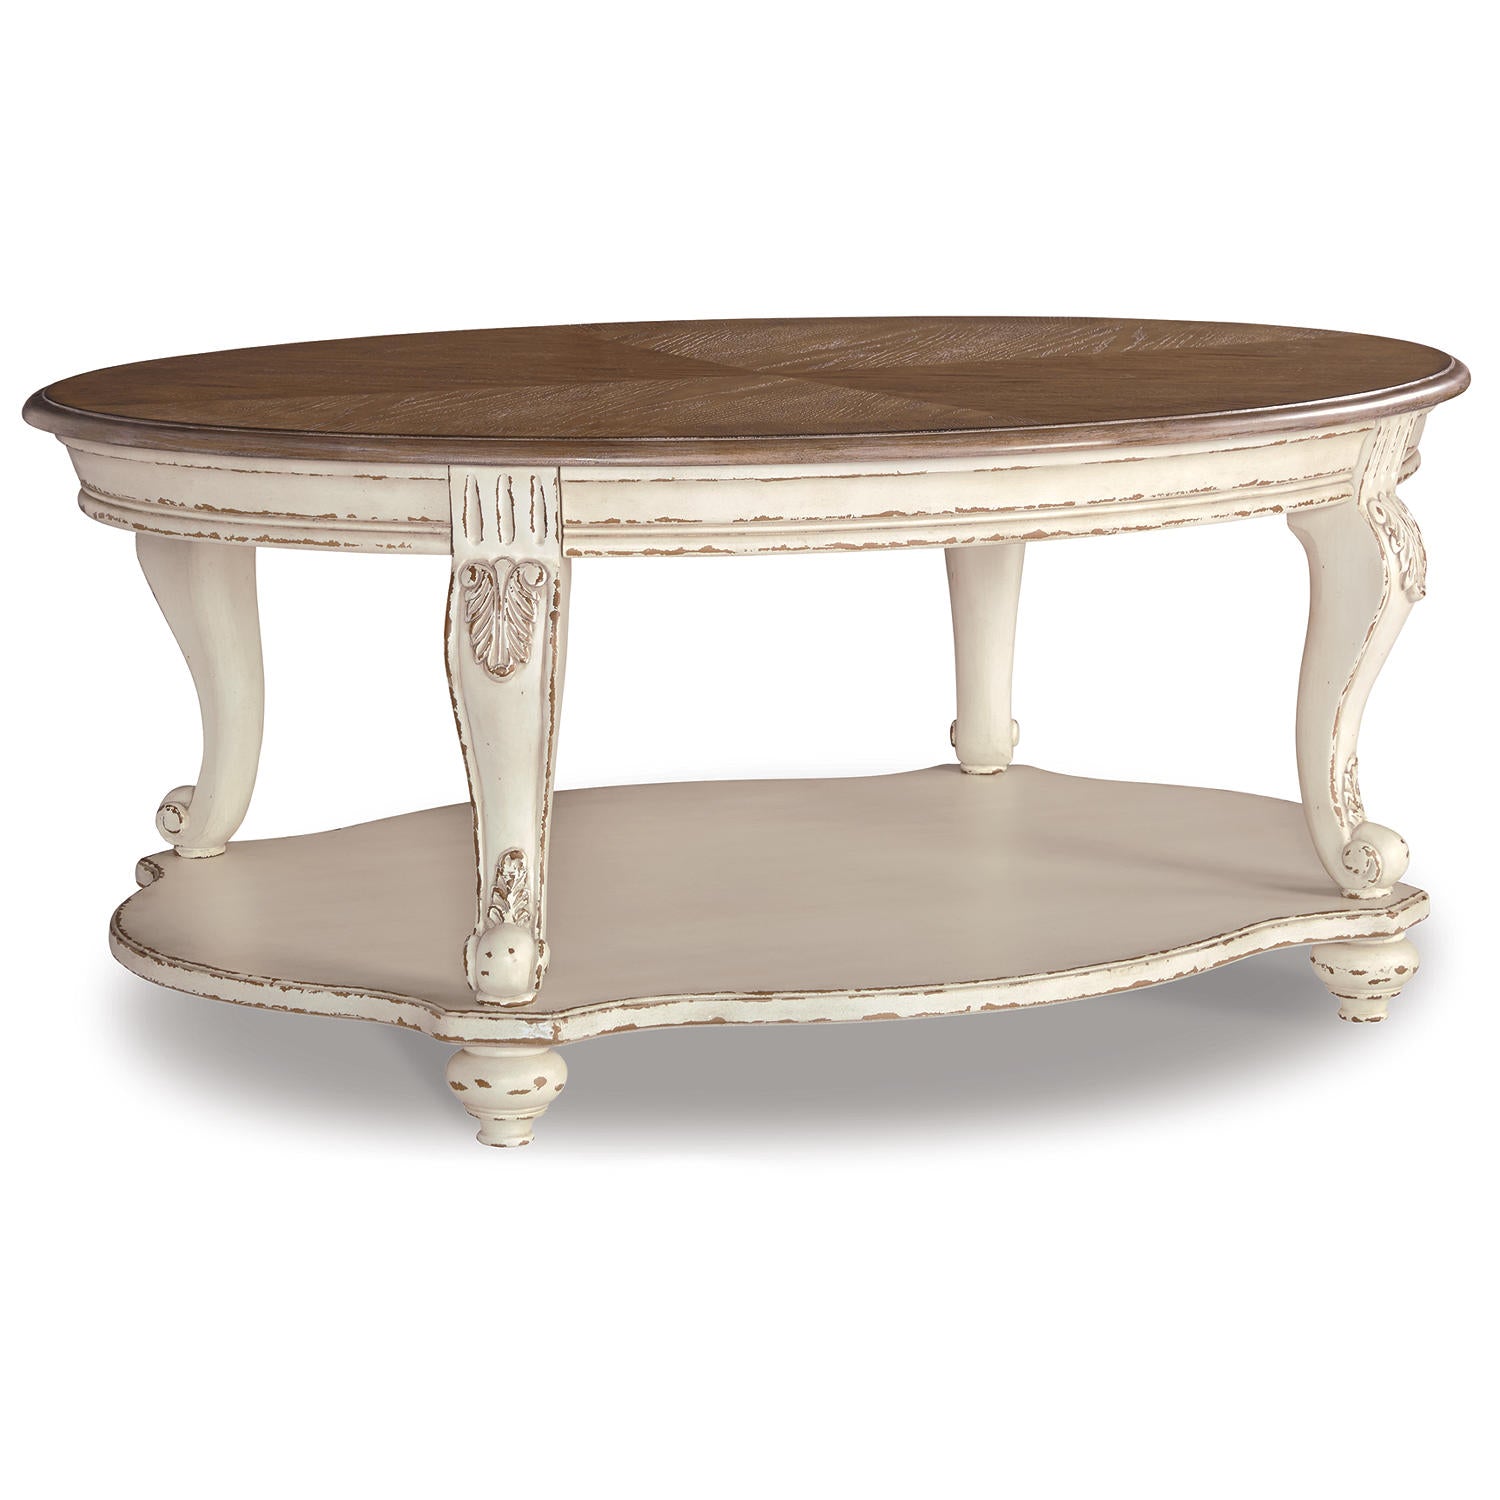 Realyn Oval Coffee Table - White/Brown